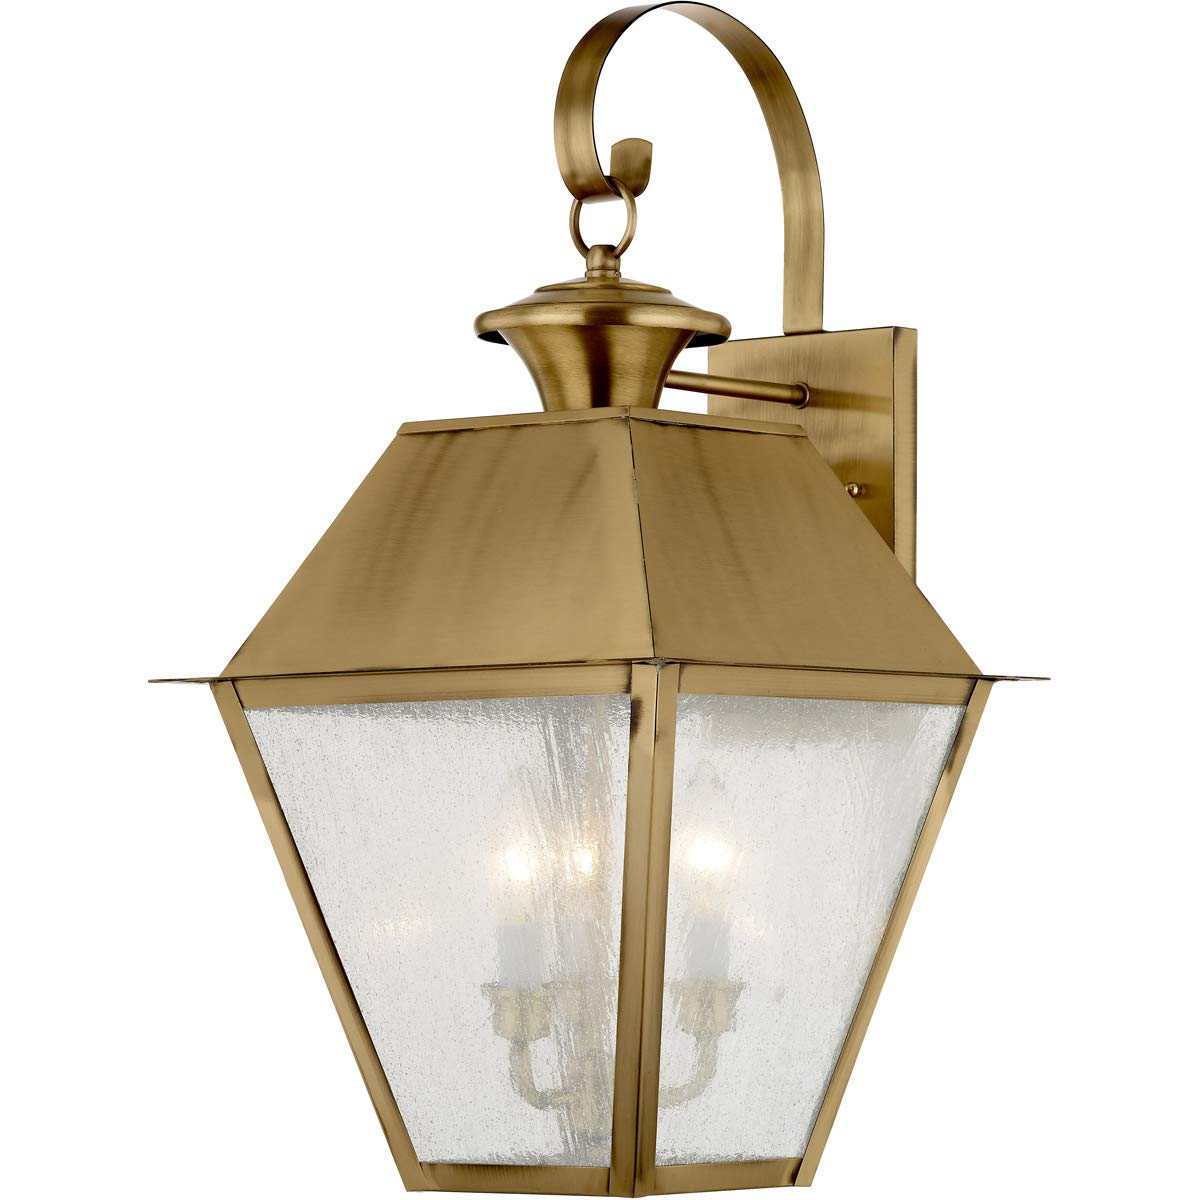 Livex Lighting 2168-01 Transitional Three Light Outdoor Wall Lantern from Mansfield Collection Finish, Antique Brass